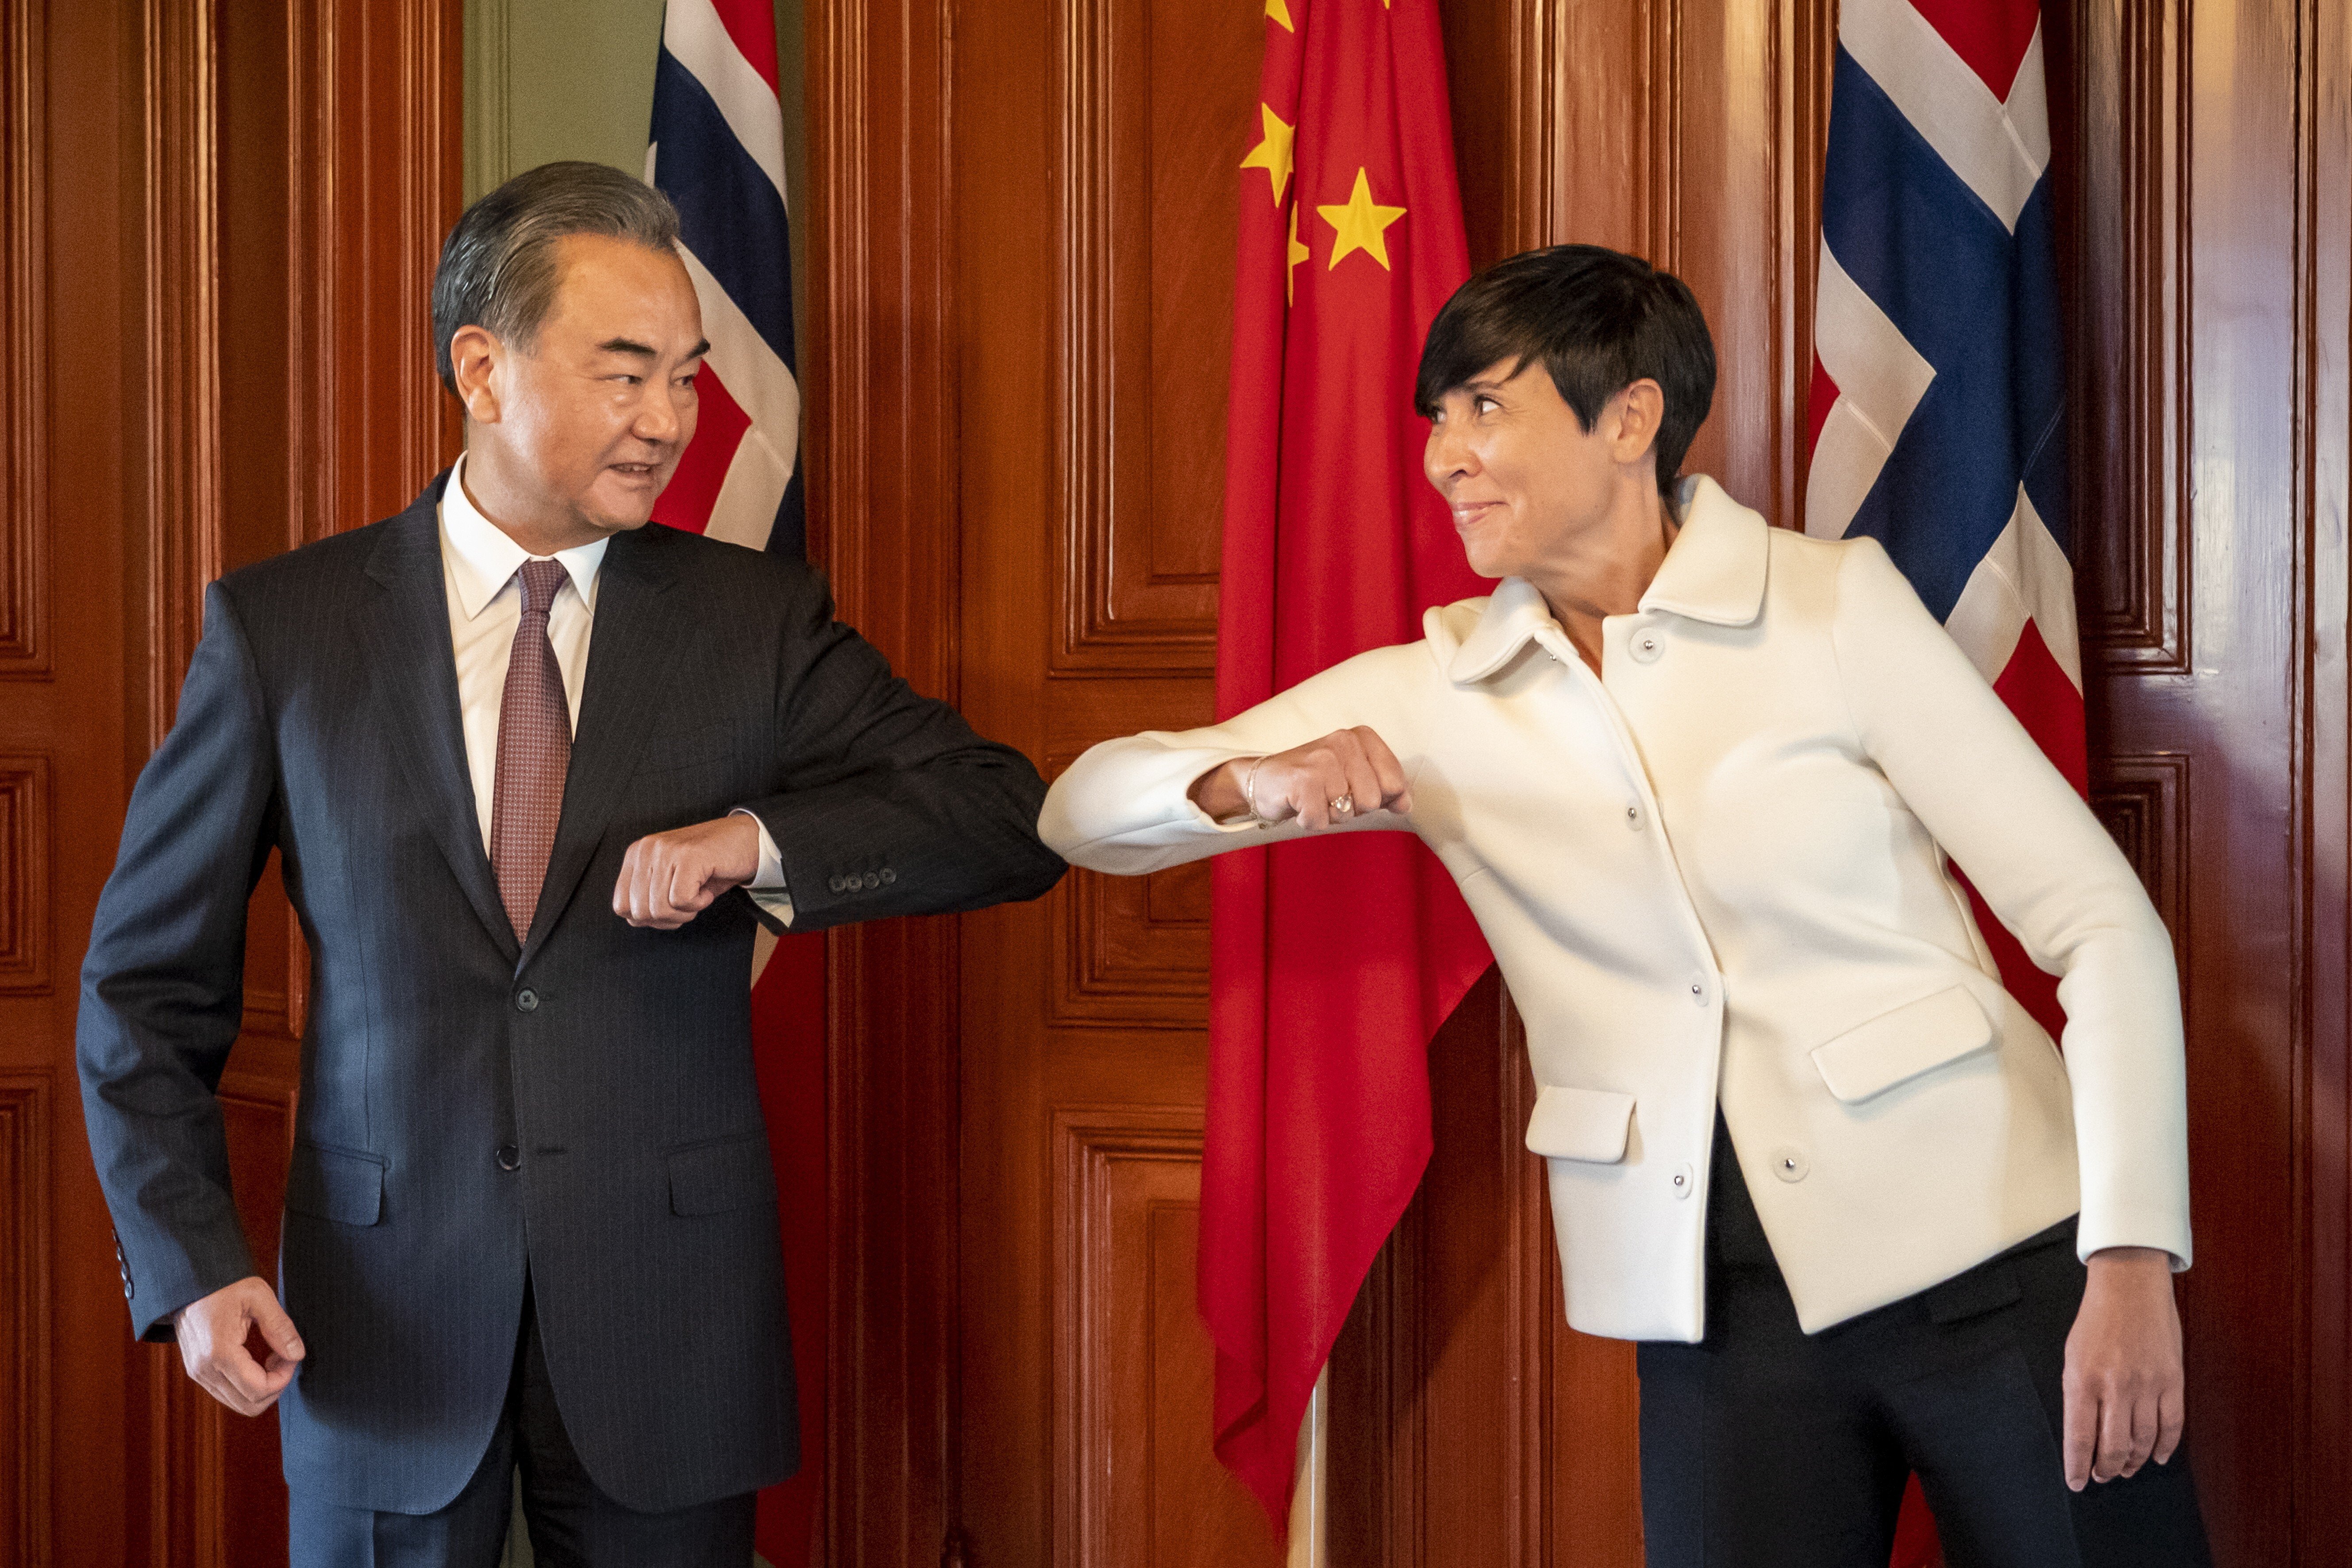 Norway's Foreign Minister Ine Eriksen Soreide (R) makes a corona greeting as she welcomes Chinese Foreign Minister Wang Yi (L) to Norway. Photo: EPA-EFE